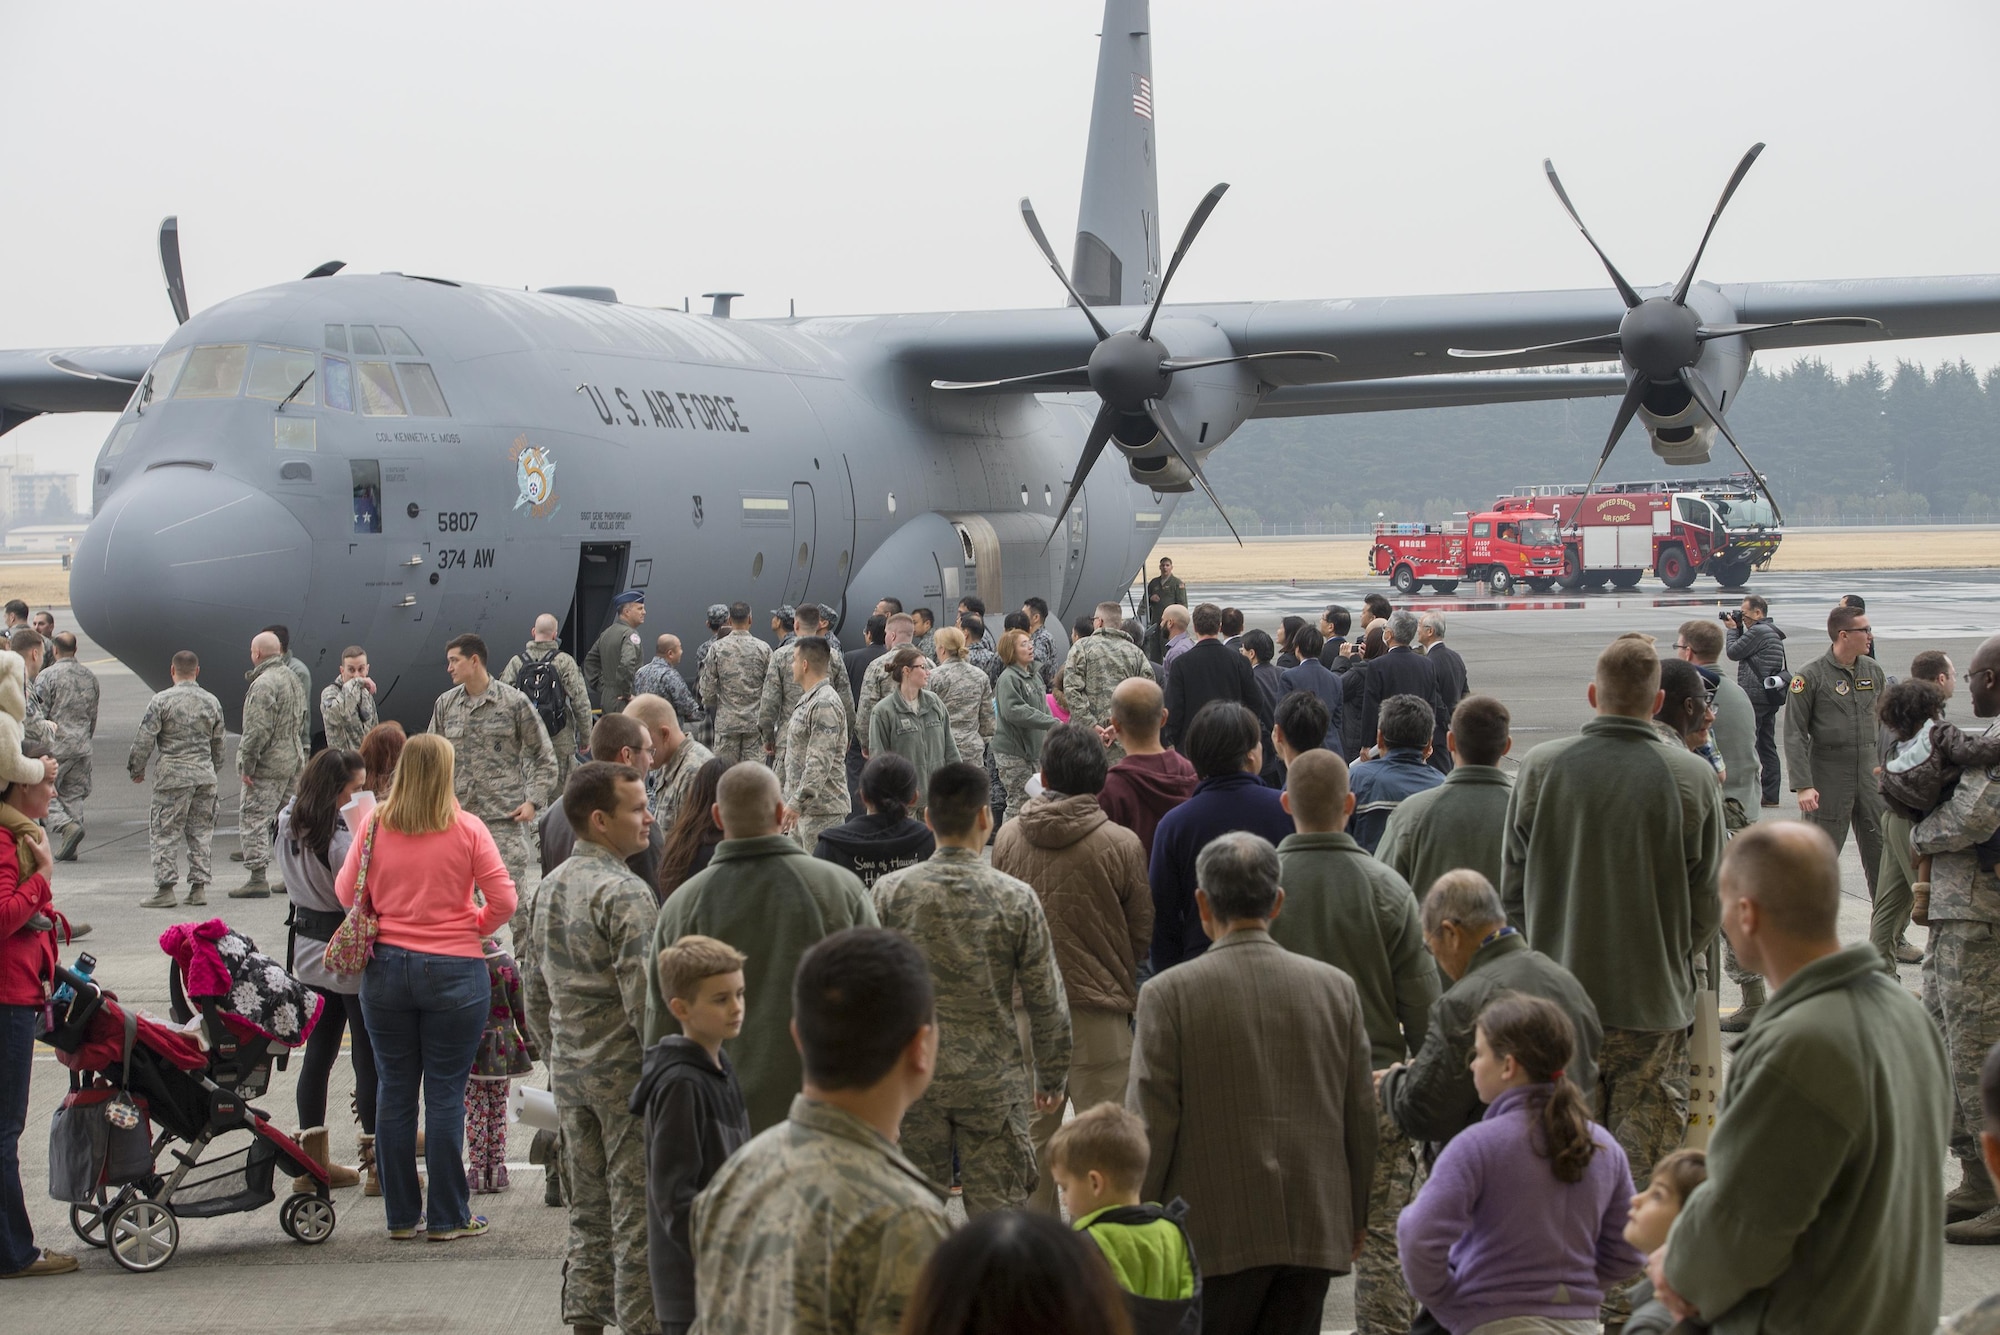 The first C-130J Super Hercules to be assigned to U.S. Pacific Air Forces arrives at Yokota Air Base, Japan, Mar. 6, 2017. The C-130Js will be used to support critical peacekeeping and contingency operations throughout the Indo-Asia Pacific region, including cargo delivery, troop transport, airdrop and aeromedical missions. (U.S. Air Force photo by Senior Airman David C. Danford)